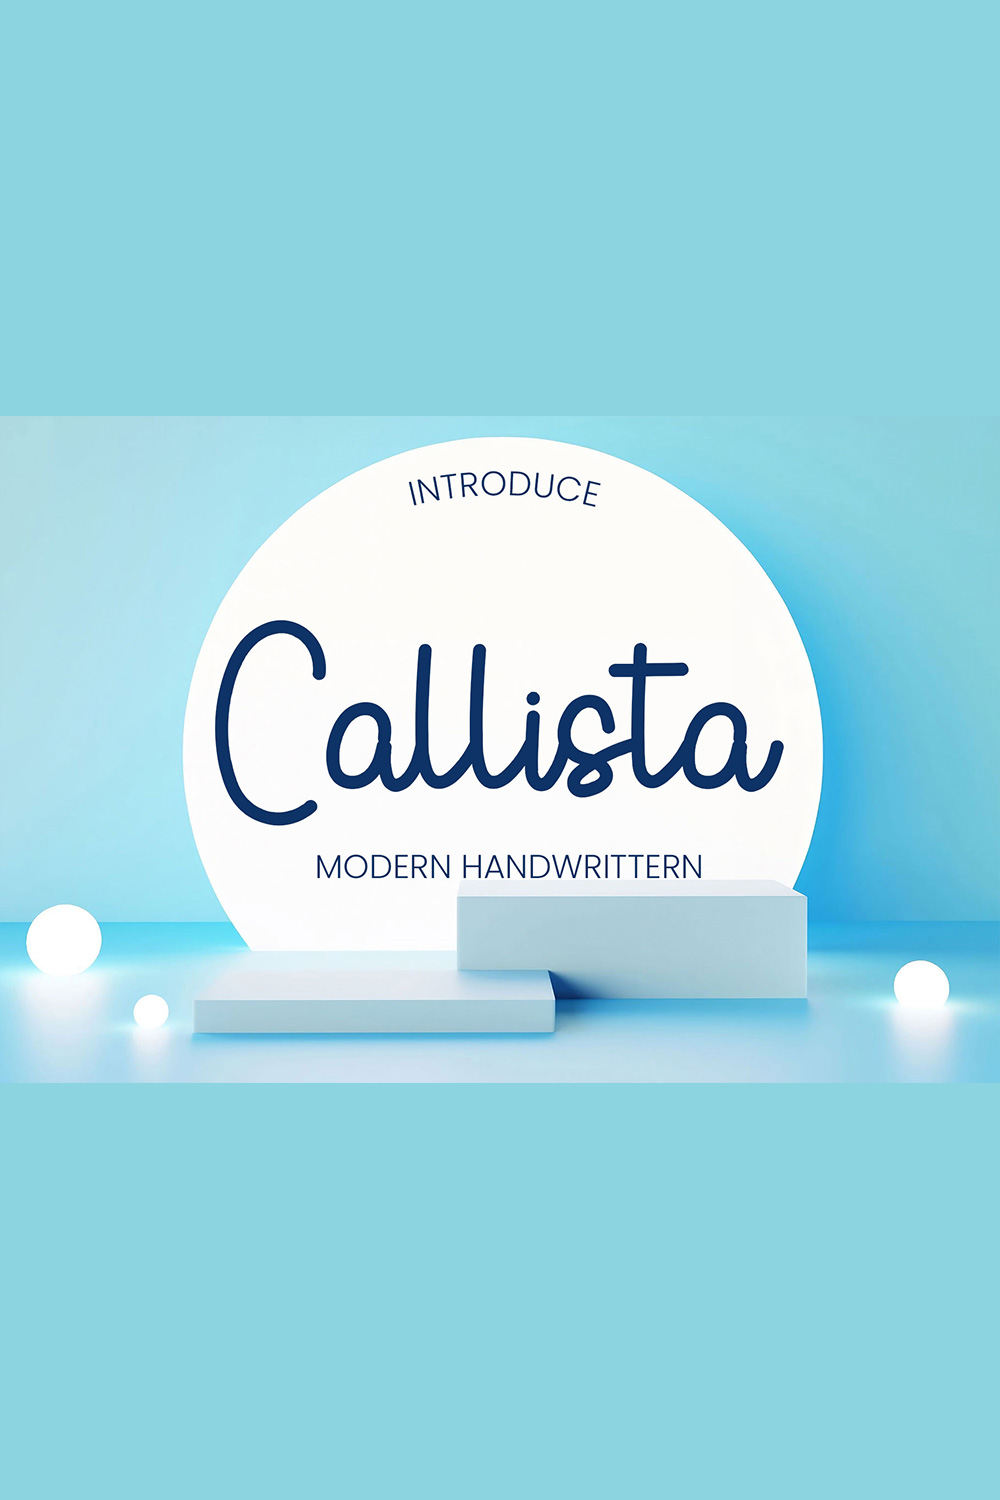 An image with text showing off the gorgeous Callista font